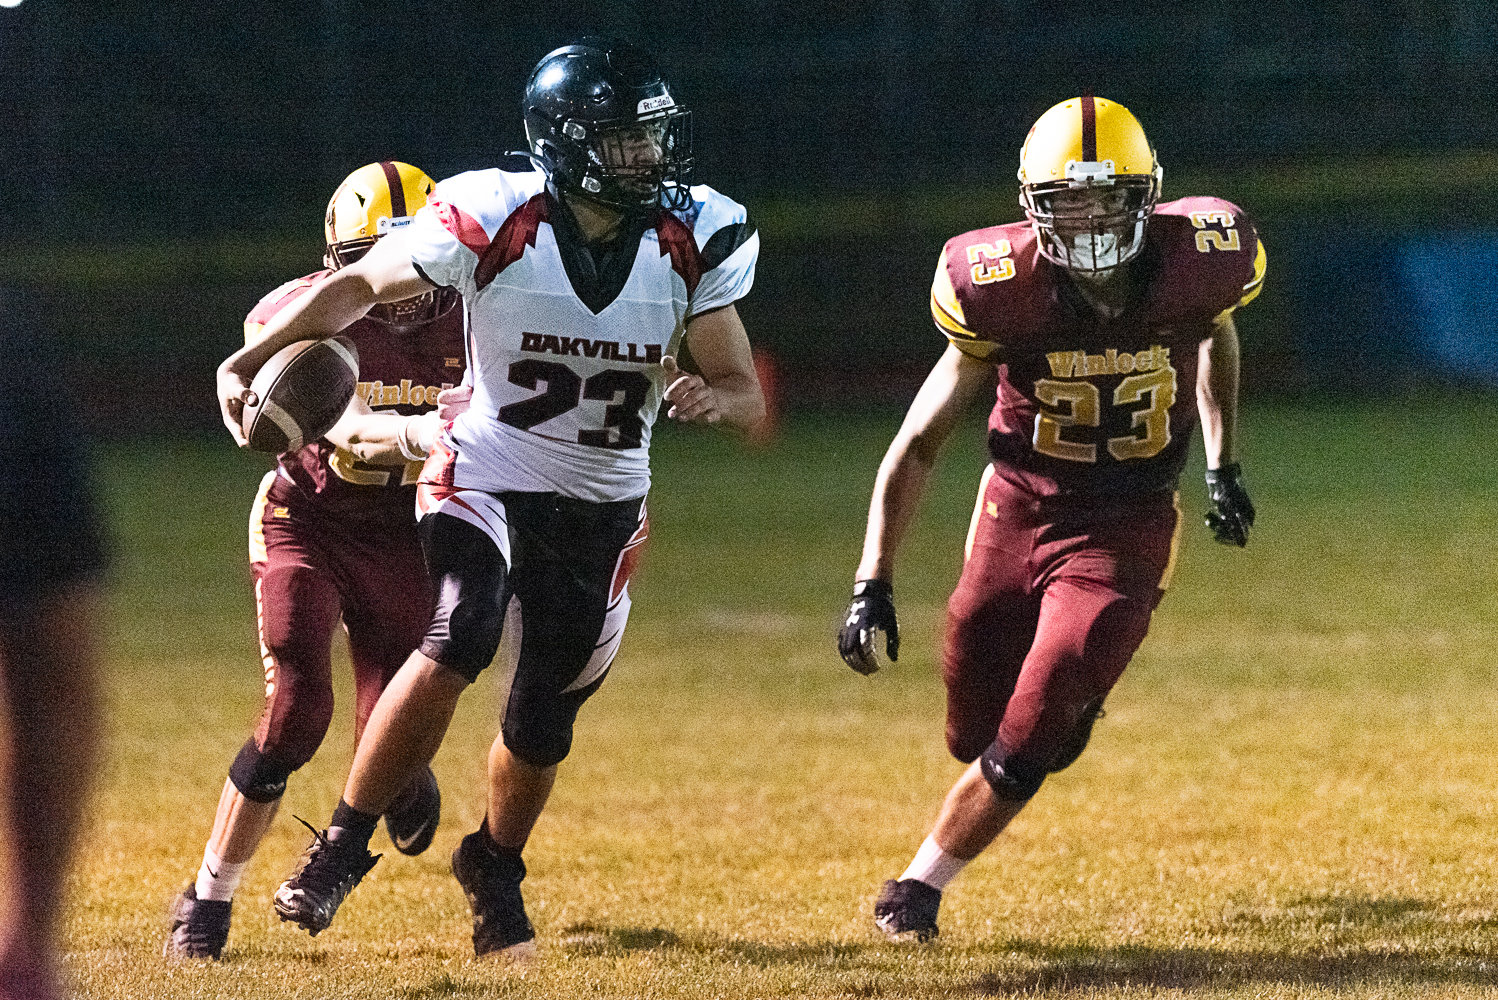 Oakville's Ashton Boyd goes upfield after a catch during the Acorns' 36-28 loss to Winlock on Oct. 7.